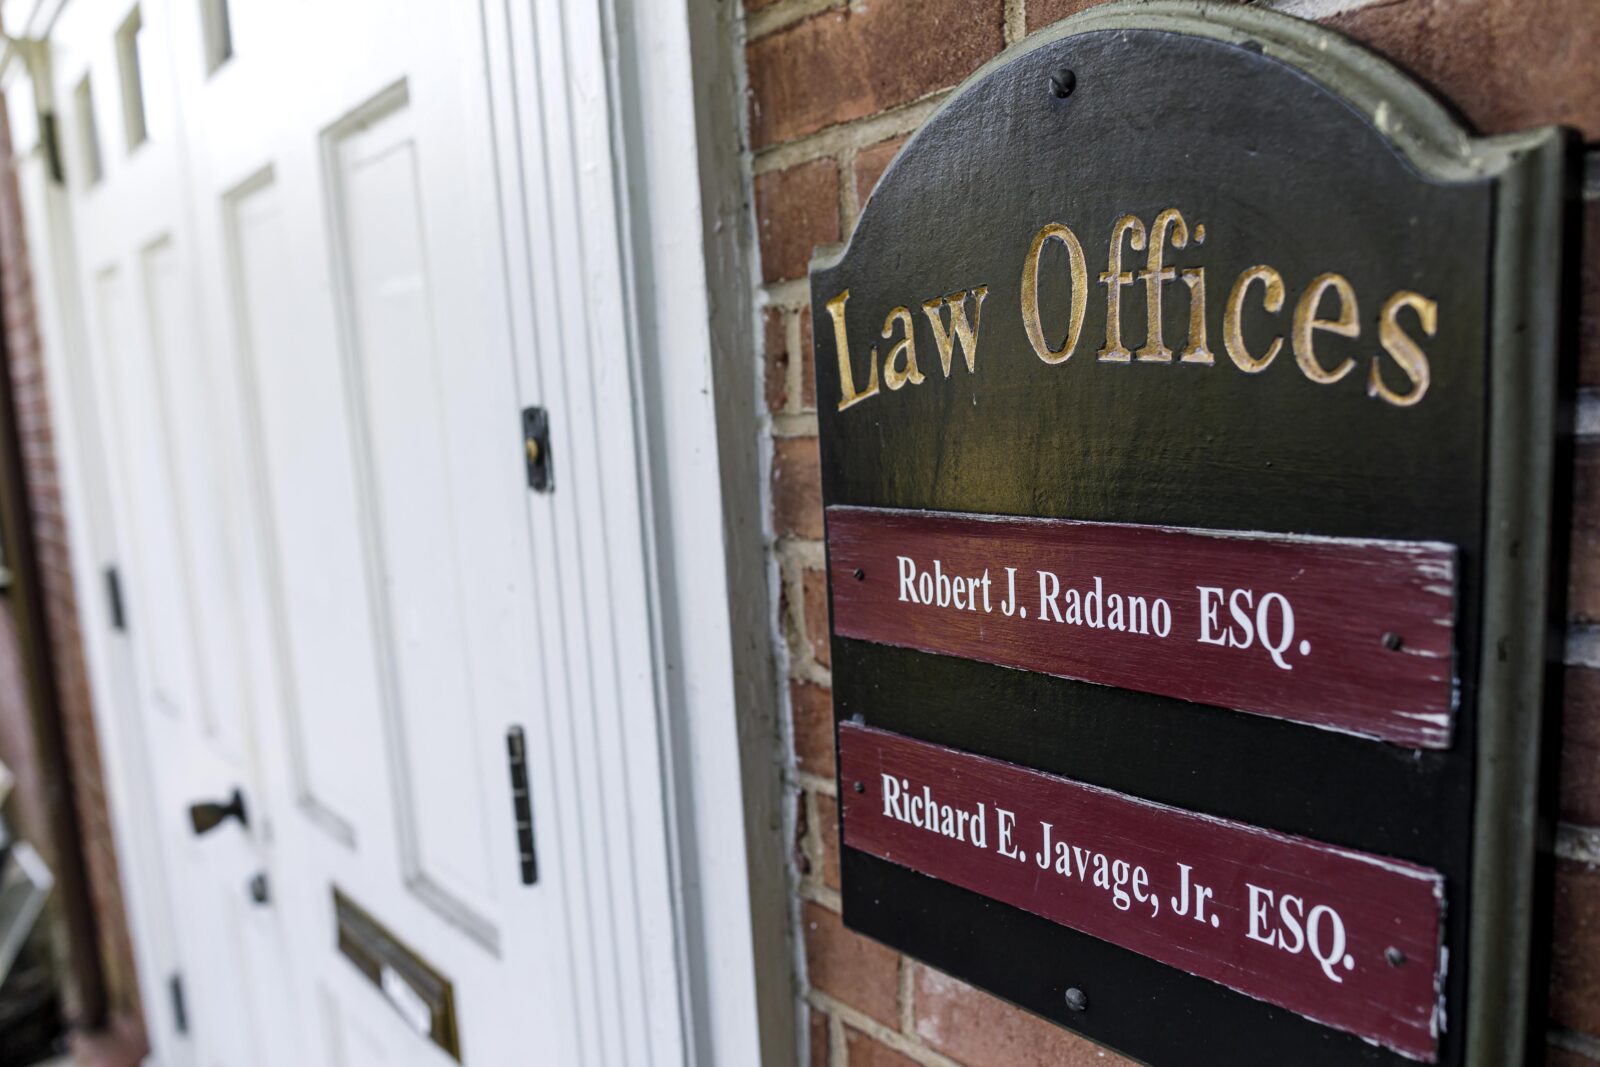 The law offices of Robert J. Radano, a district judge who had the equivalent of five months without court appearances in 2019 despite receiving good benefits paid by taxpayers. DAN GLEITER / PennLive